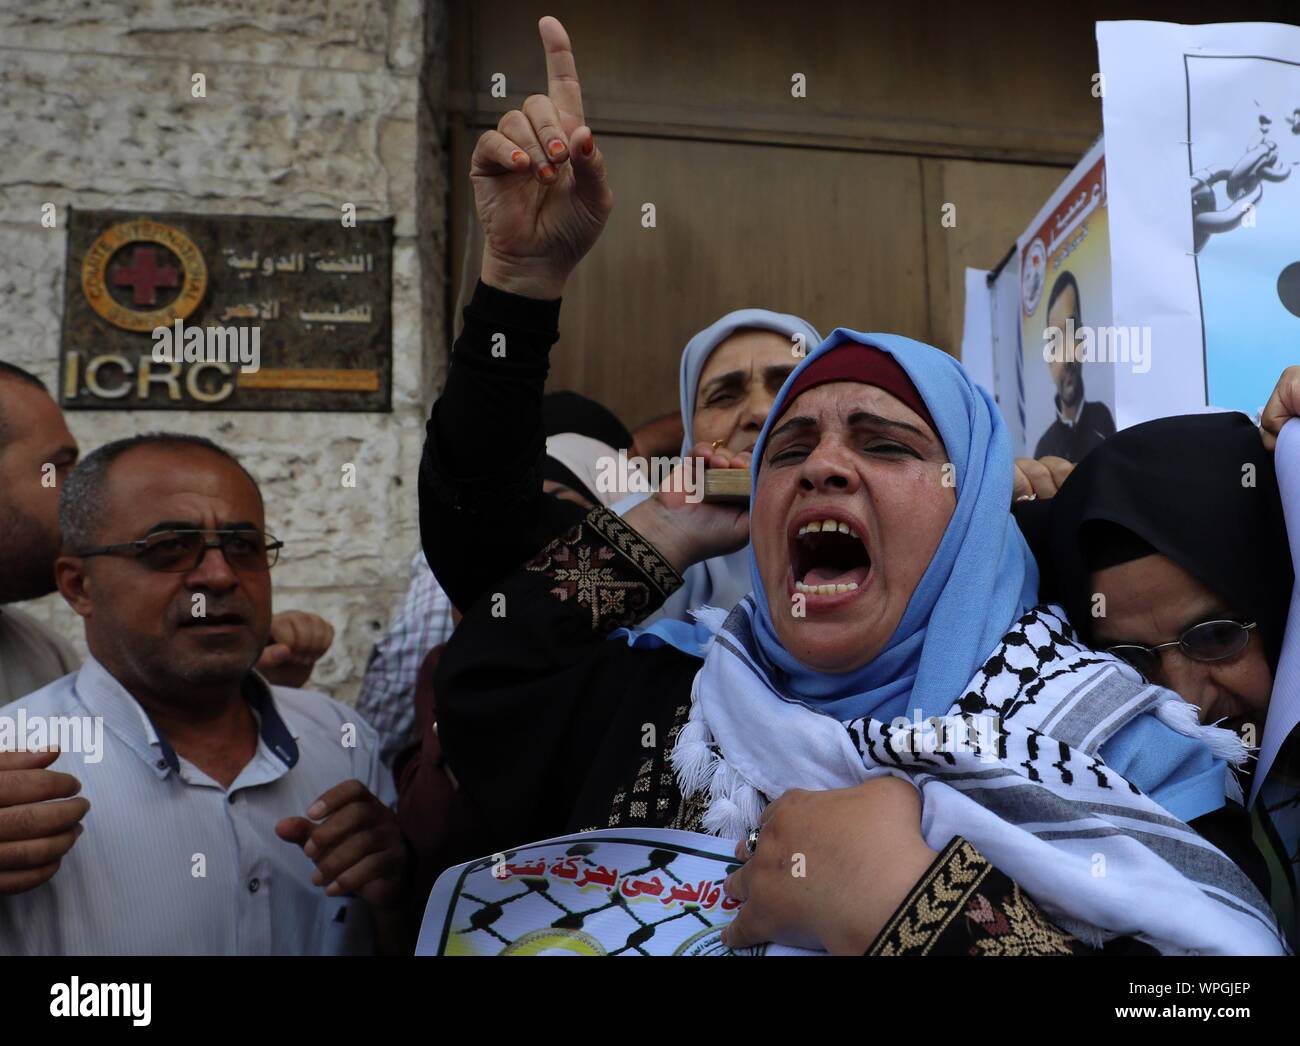 (190909) -- GAZA, Sept. 9, 2019 (Xinhua) -- Palestinians take part in a protest against the death of Palestinian prisoner Bassam al-Sayeh in Gaza City, Sept. 9, 2019. Bassam al-Sayeh from the northern West Bank city of Nablus, who suffered cancer, died in an Israeli prison. The Palestinians slammed Israel for medical negligence. (Photo by Yasser Qudih/Xinhua) Stock Photo